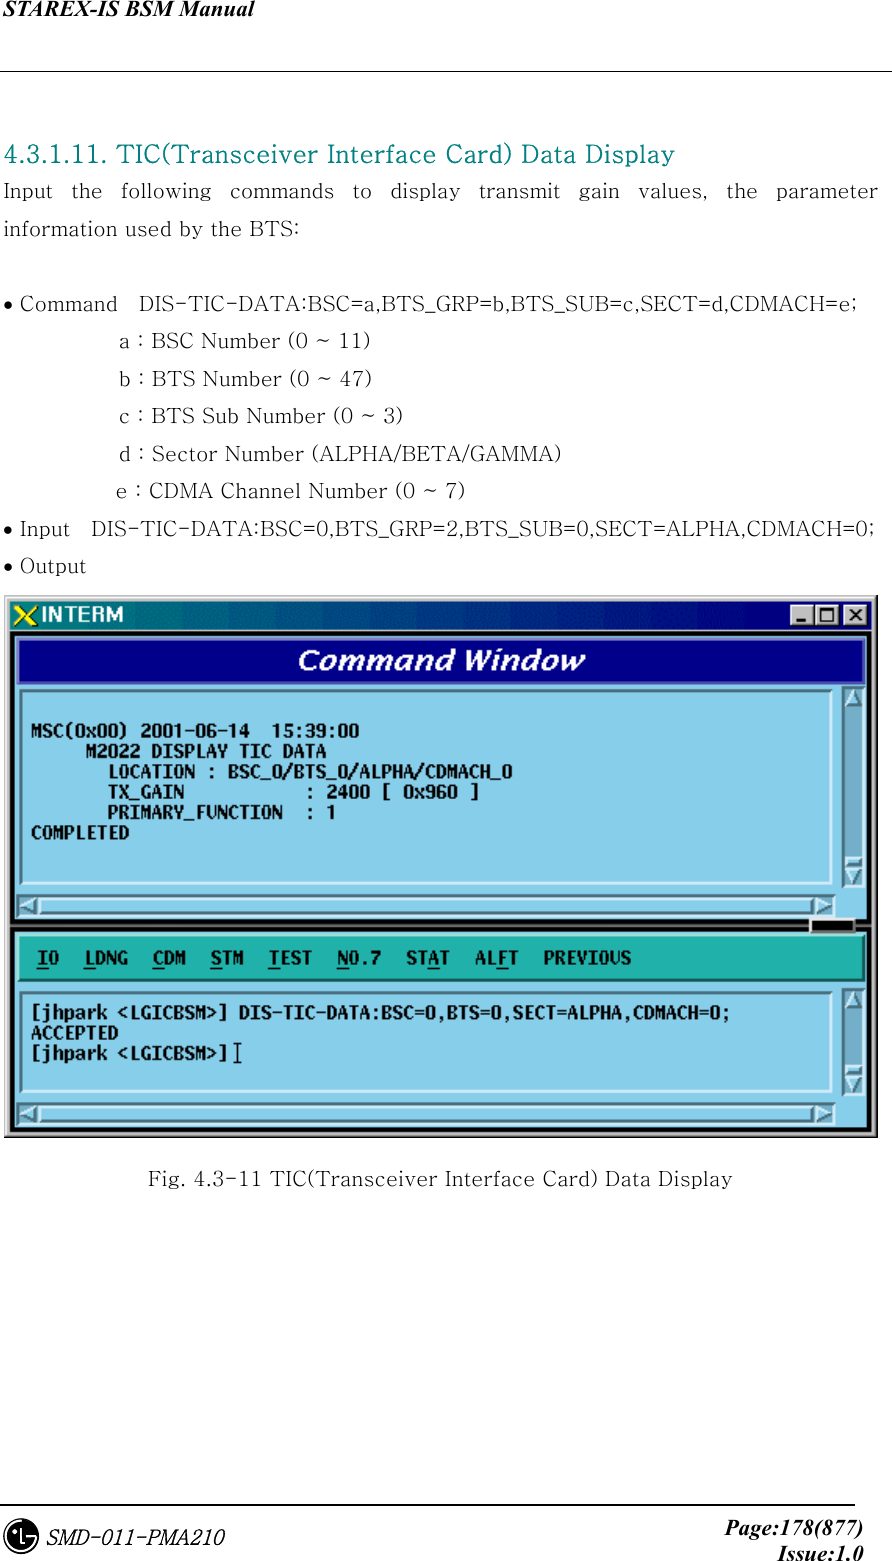 STAREX-IS BSM Manual     Page:178(877)Issue:1.0SMD-011-PMA210  4.3.1.11. TIC(Transceiver Interface Card) Data Display   Input the following commands to display transmit gain values, the  parameter information used by the BTS:  • Command    DIS-TIC-DATA:BSC=a,BTS_GRP=b,BTS_SUB=c,SECT=d,CDMACH=e;            a : BSC Number (0 ~ 11)            b : BTS Number (0 ~ 47)            c : BTS Sub Number (0 ~ 3)            d : Sector Number (ALPHA/BETA/GAMMA) e : CDMA Channel Number (0 ~ 7) • Input    DIS-TIC-DATA:BSC=0,BTS_GRP=2,BTS_SUB=0,SECT=ALPHA,CDMACH=0; • Output  Fig. 4.3-11 TIC(Transceiver Interface Card) Data Display 